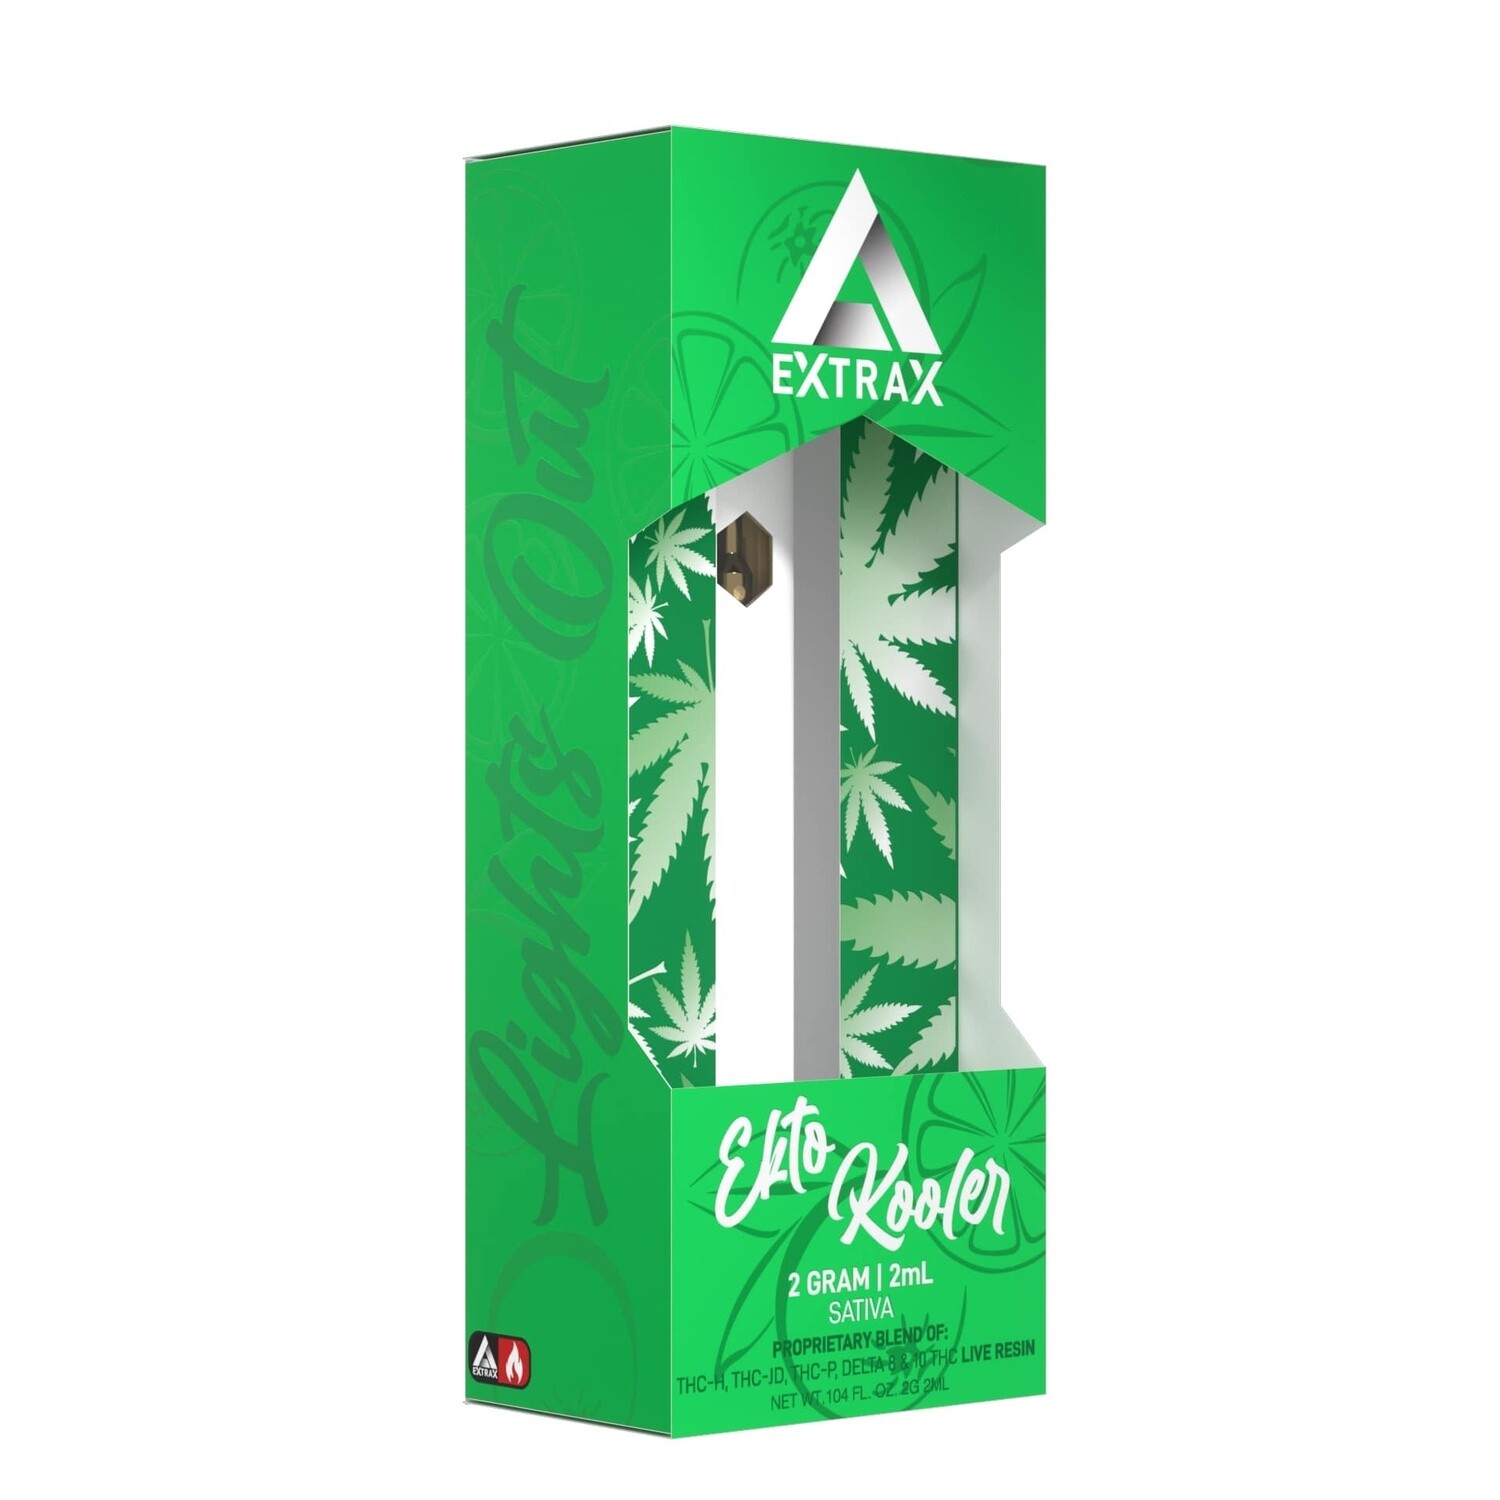 Delta Extrax Lights Out Ekto Cooler Disposable 2g